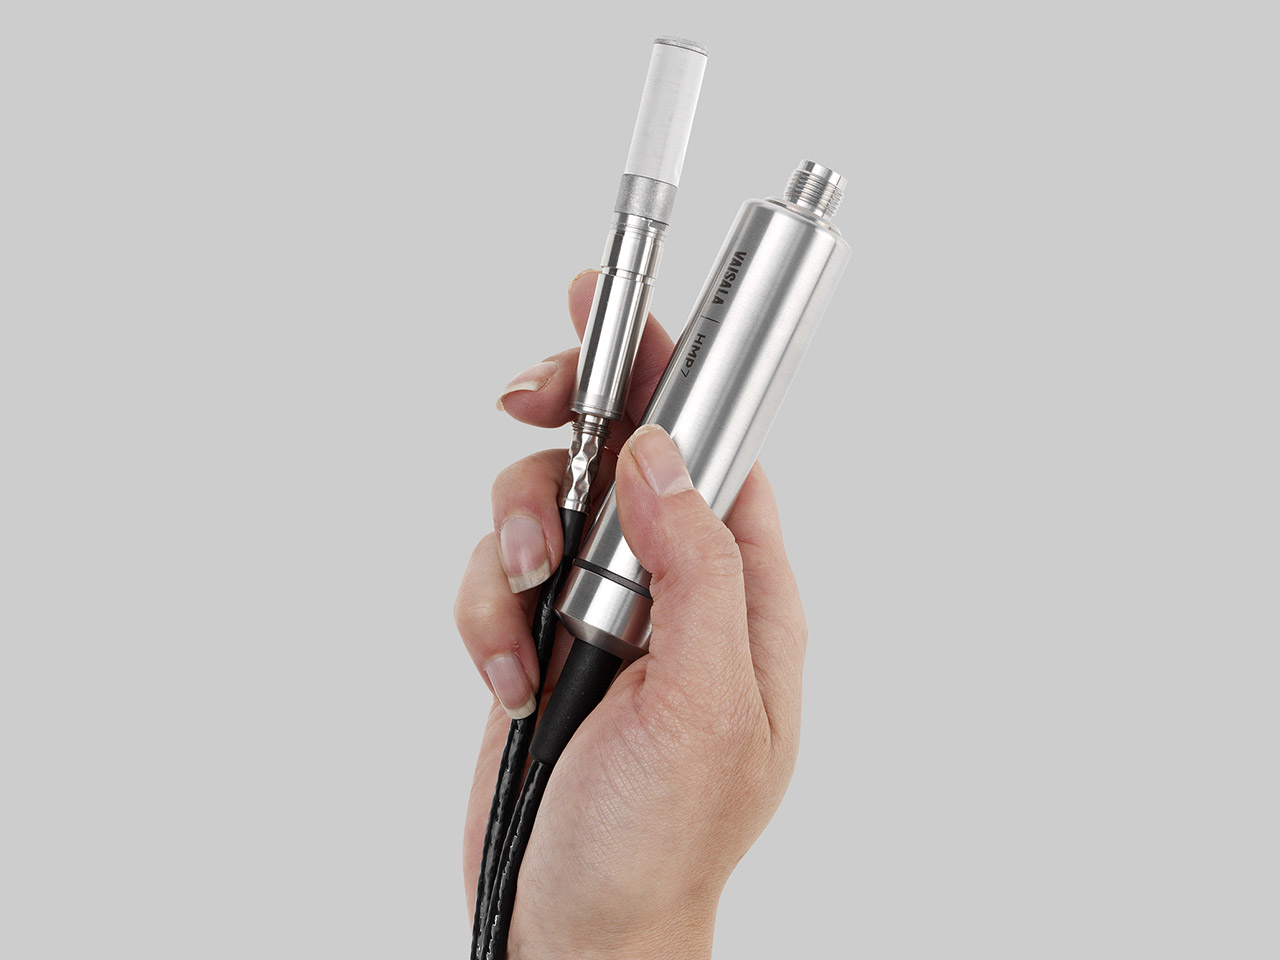 Vaisala HUMICAP ® Humidity and Temperature Probe HMP7 is designed for applications which involve constant high Humidity or rapid changes in Humidity